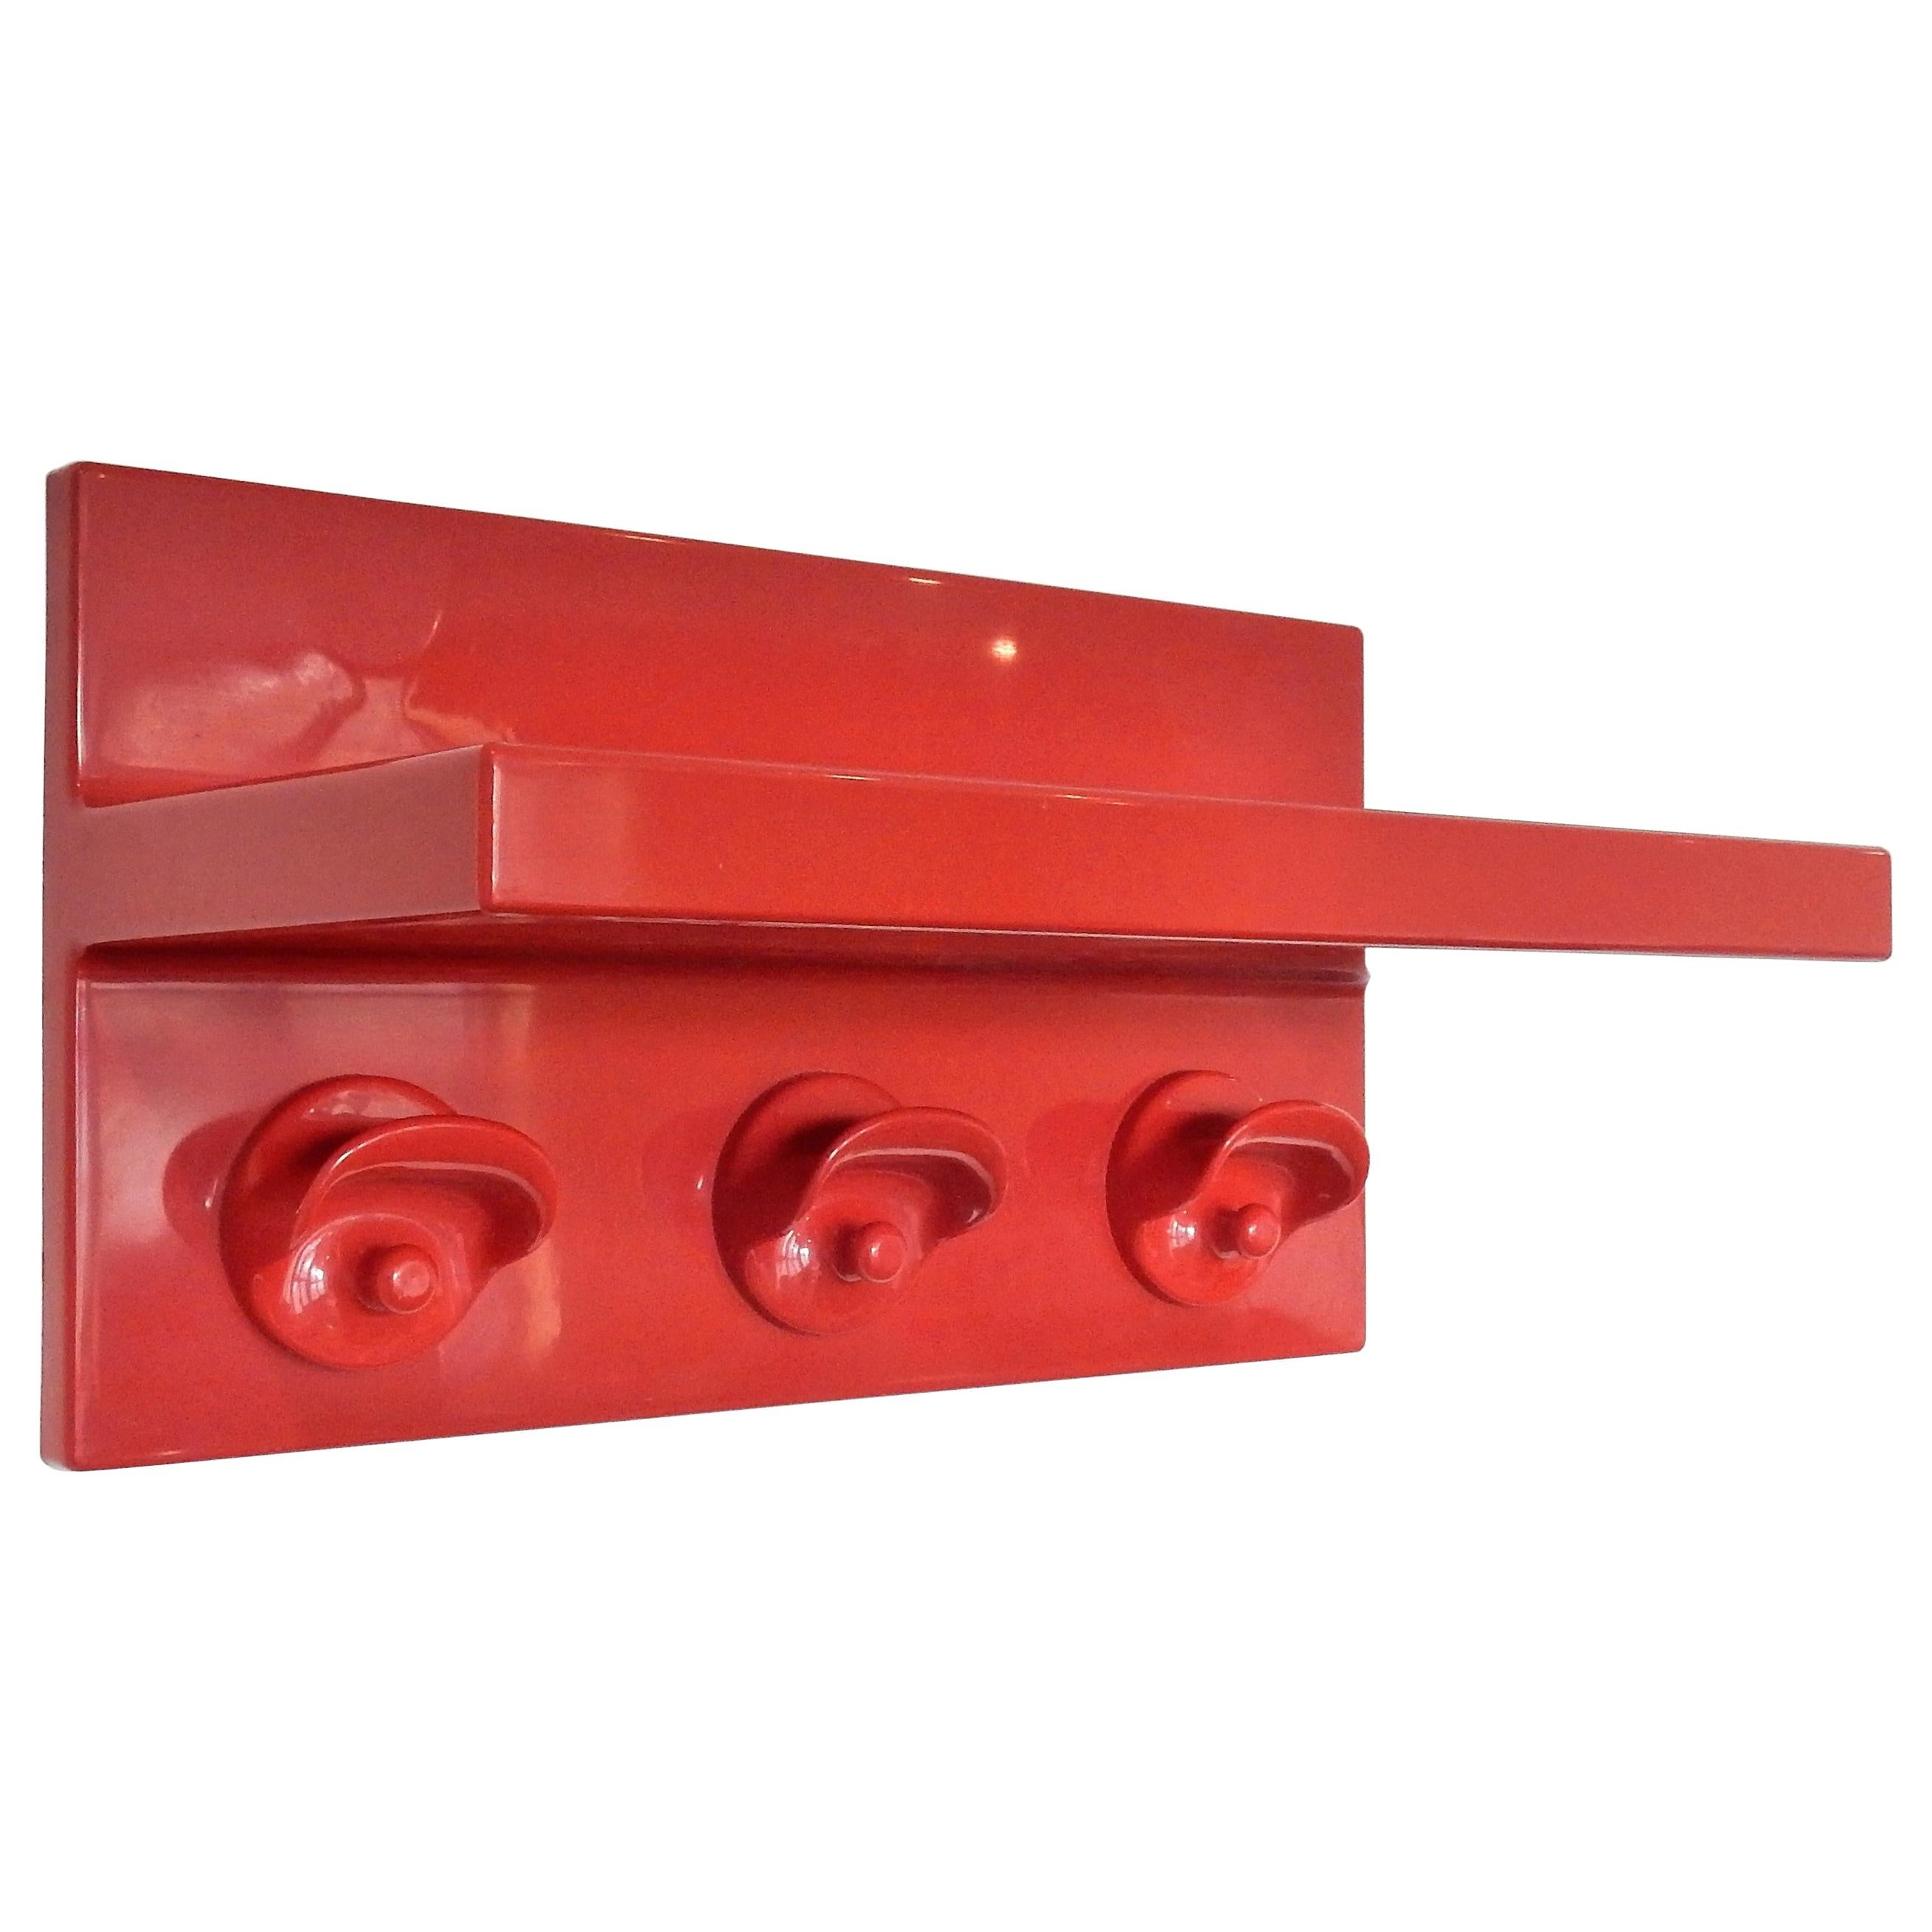 Red Plastic Coat Rack with Hat Shelf by Olaf von Bohr for Kartell, Italy, 1970s